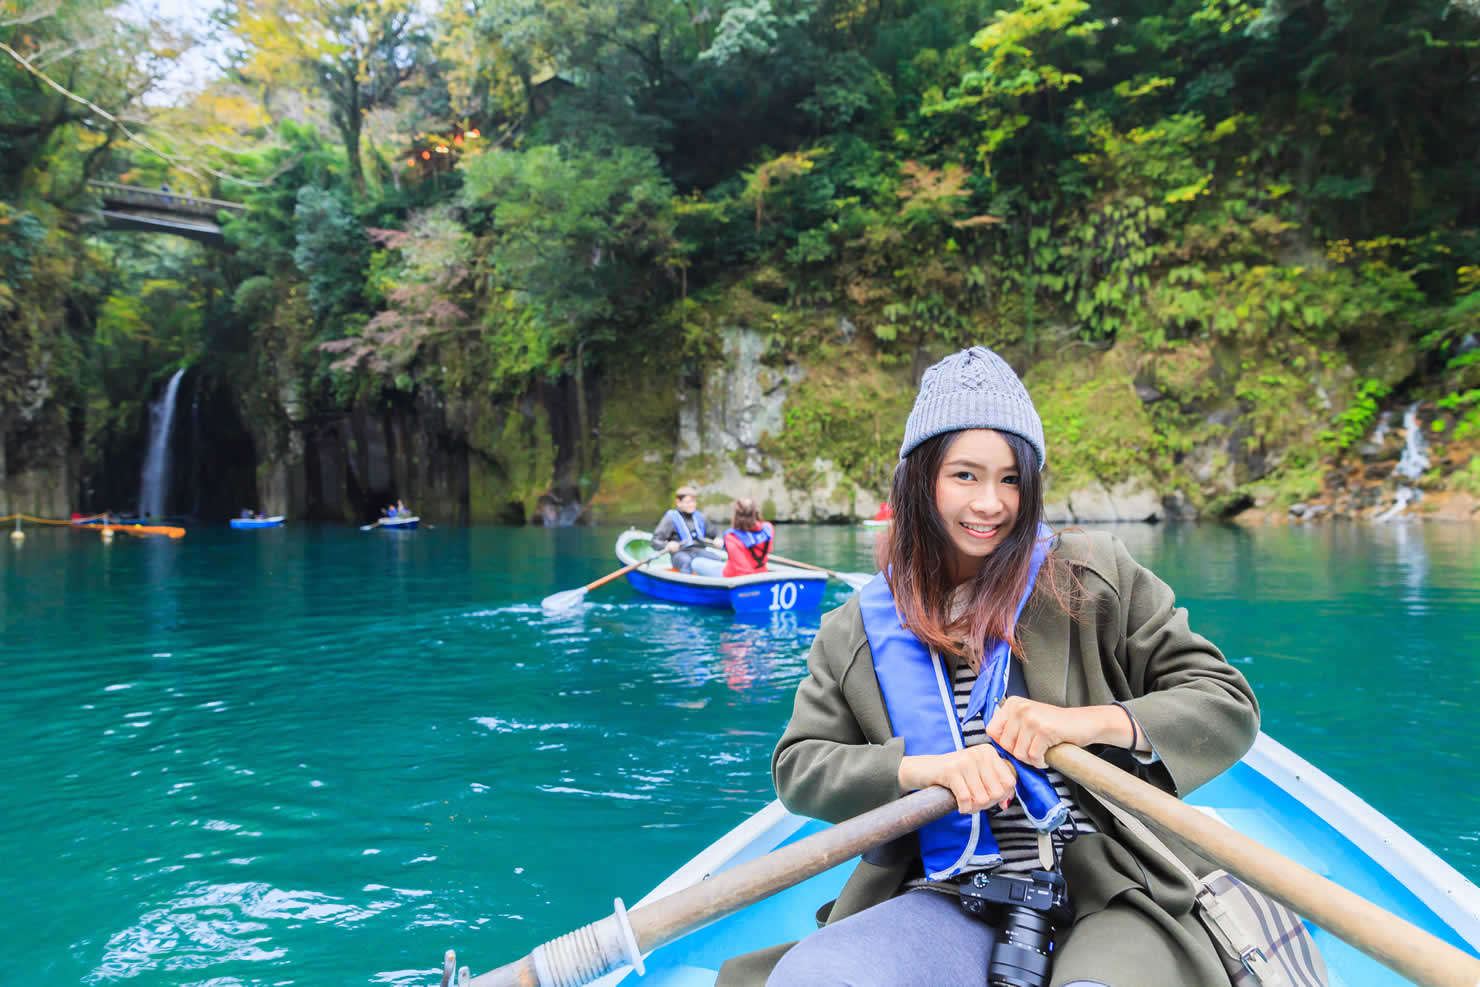 The Kyushu Bucket List: Things to do in Japan’s Southern Island